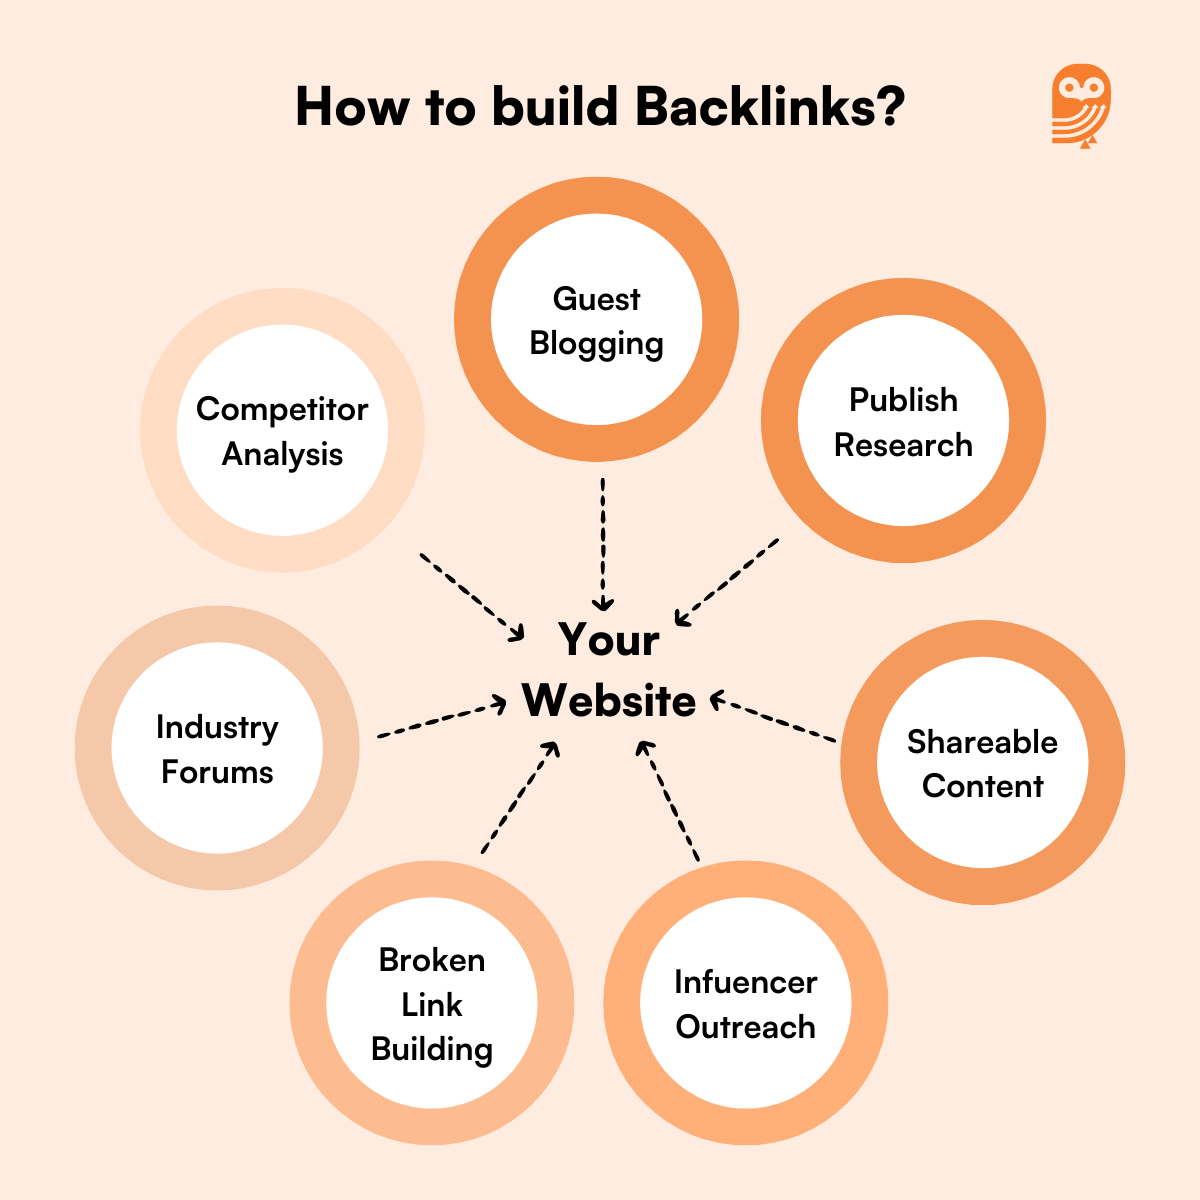 How to build Backlinks?